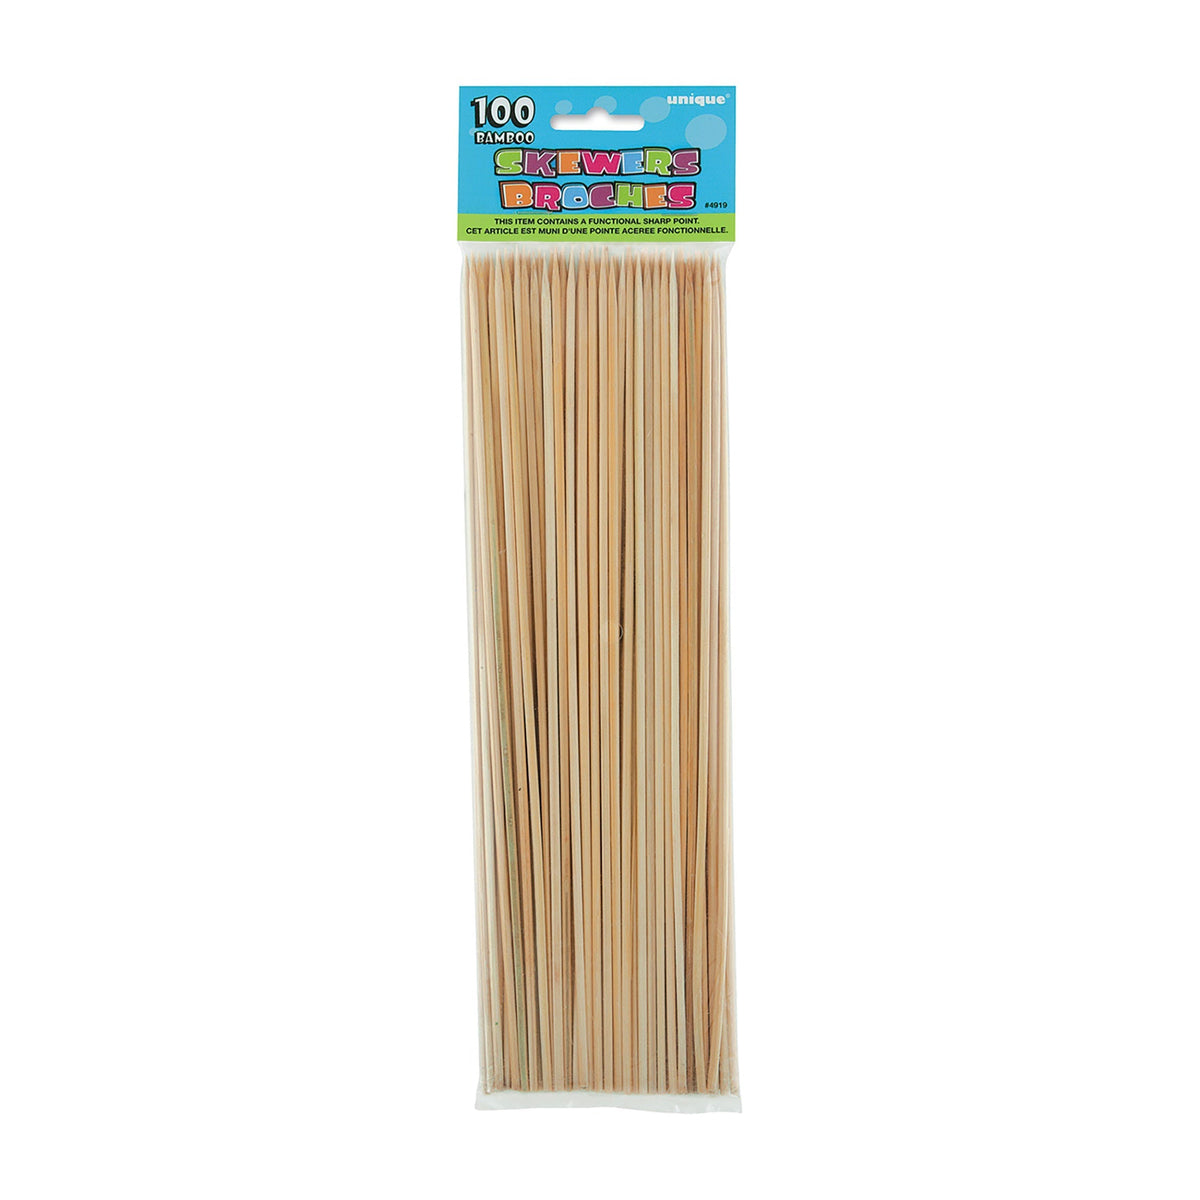 UNIQUE PARTY FAVORS Disposable-Plasticware Bamboo Skewers, 100 Count